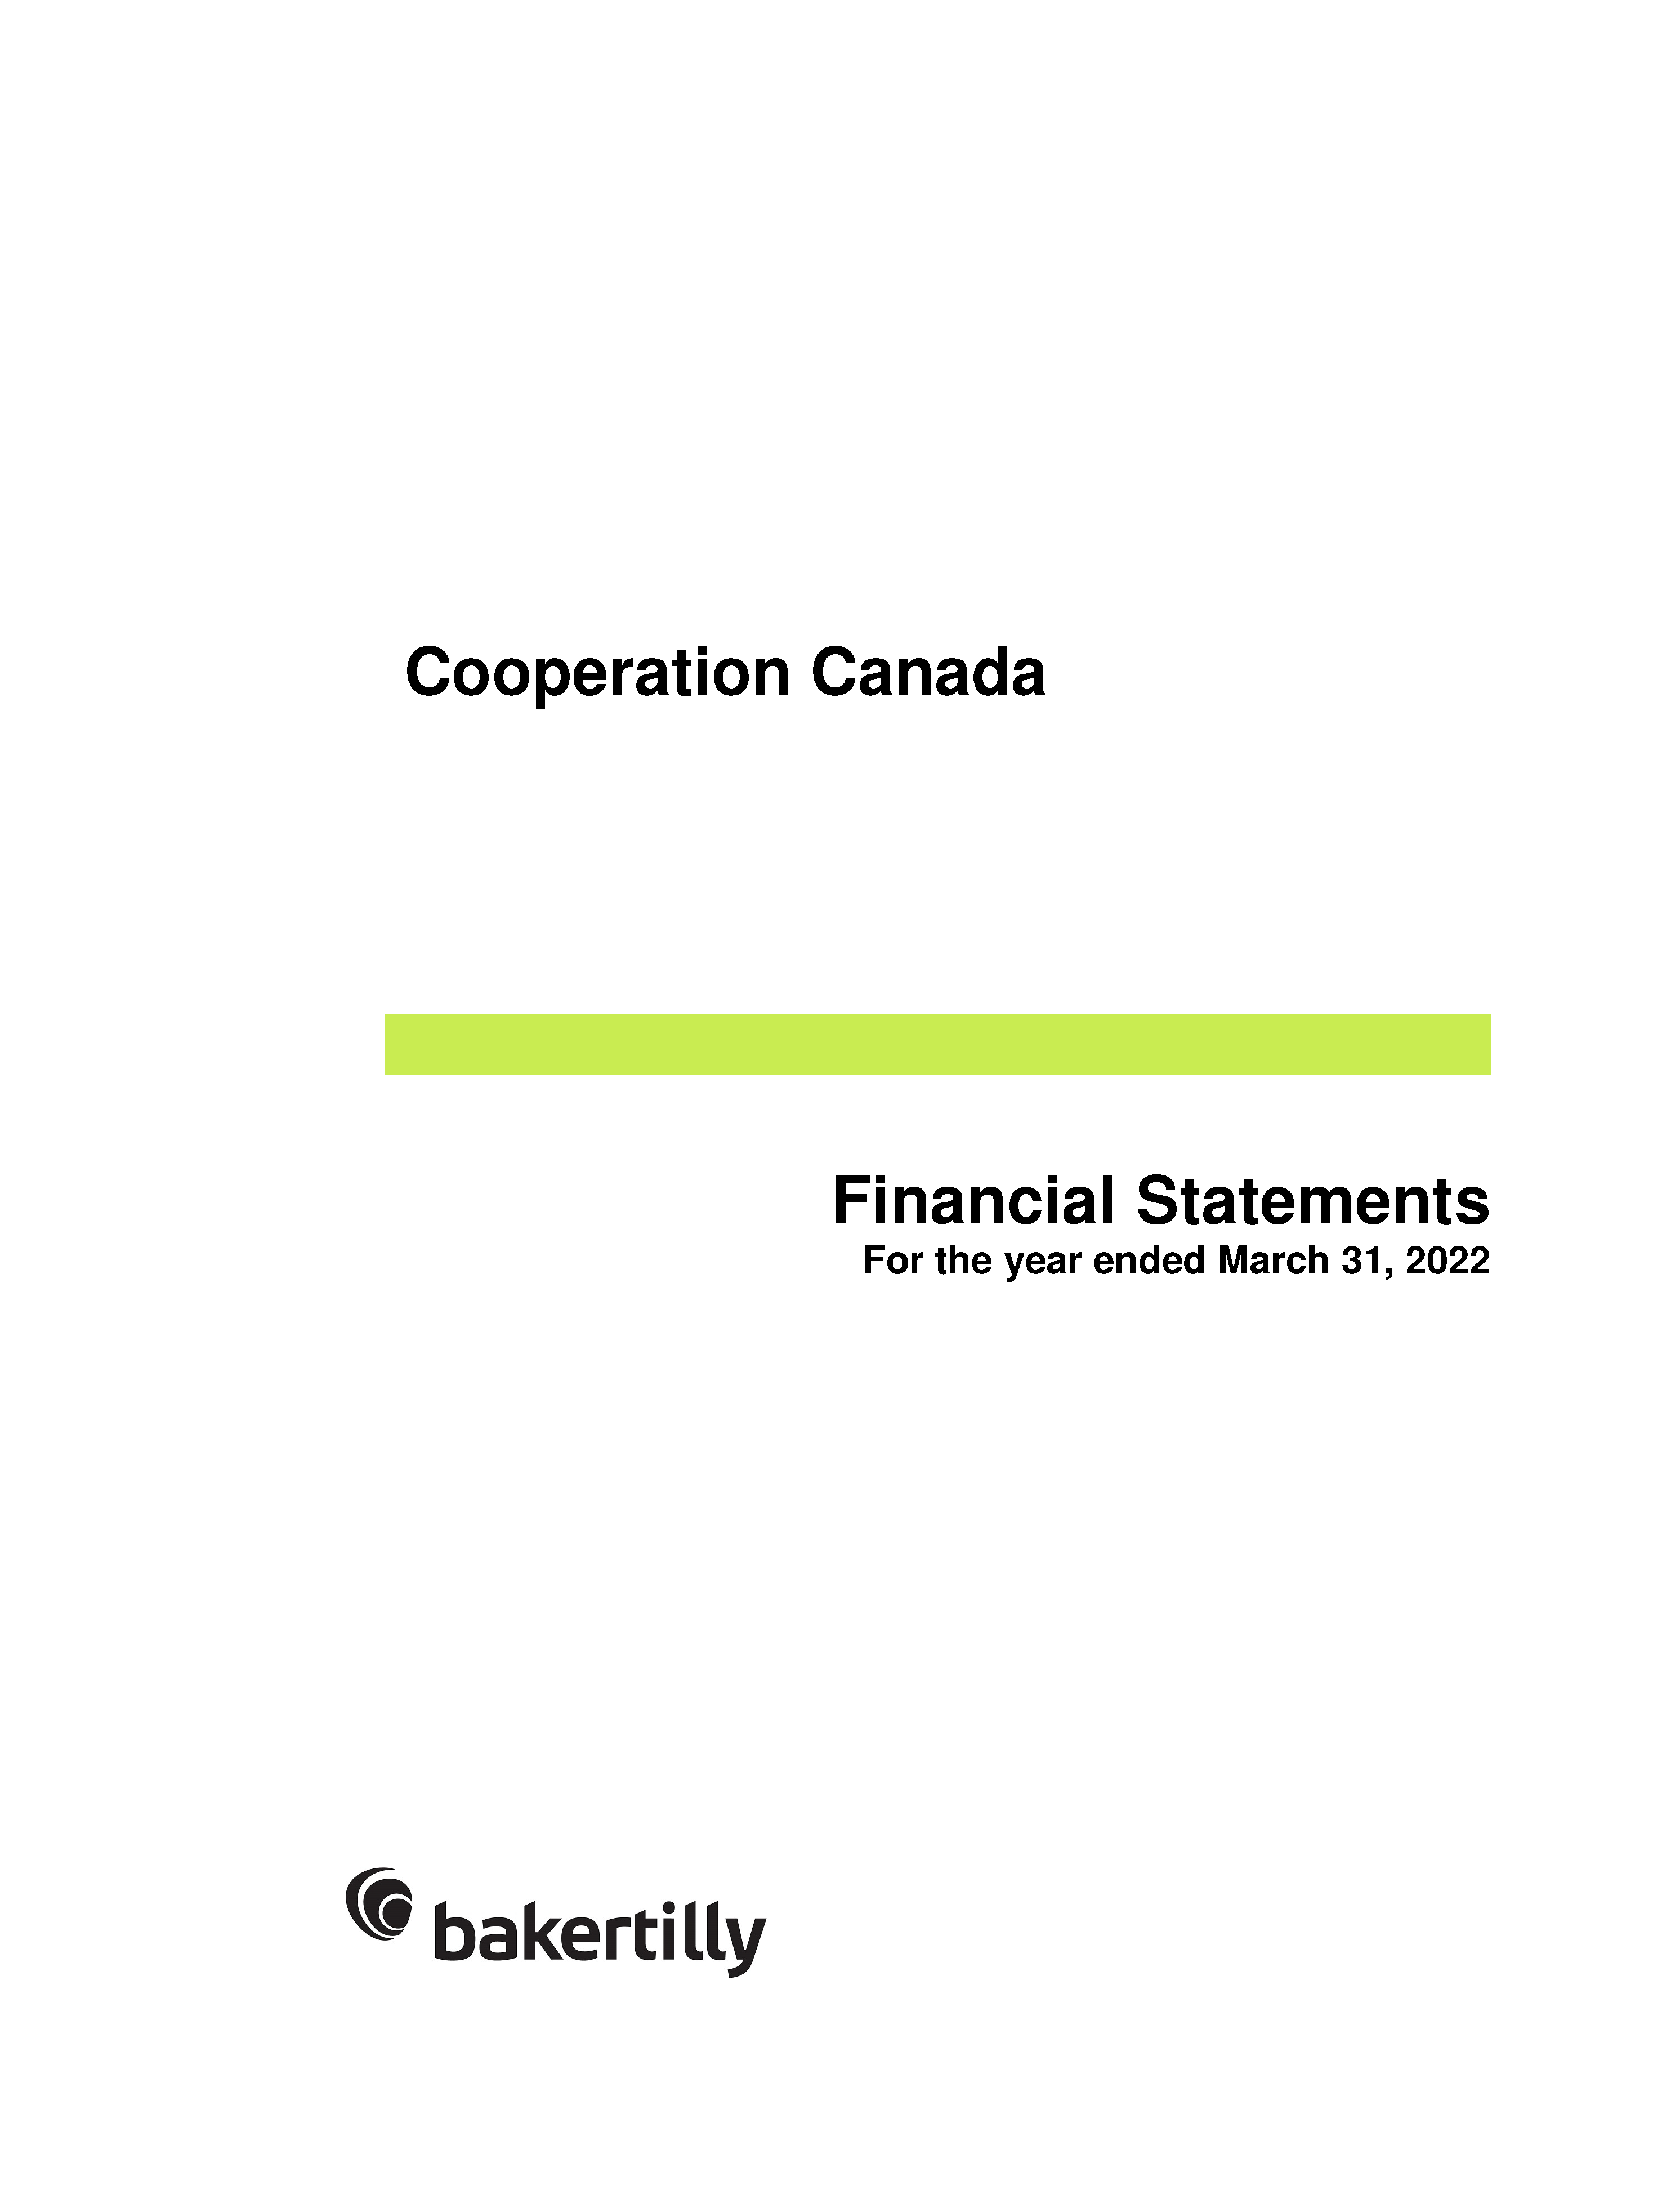 20220331-Final-FS-Cooperation-Canada_Page_01